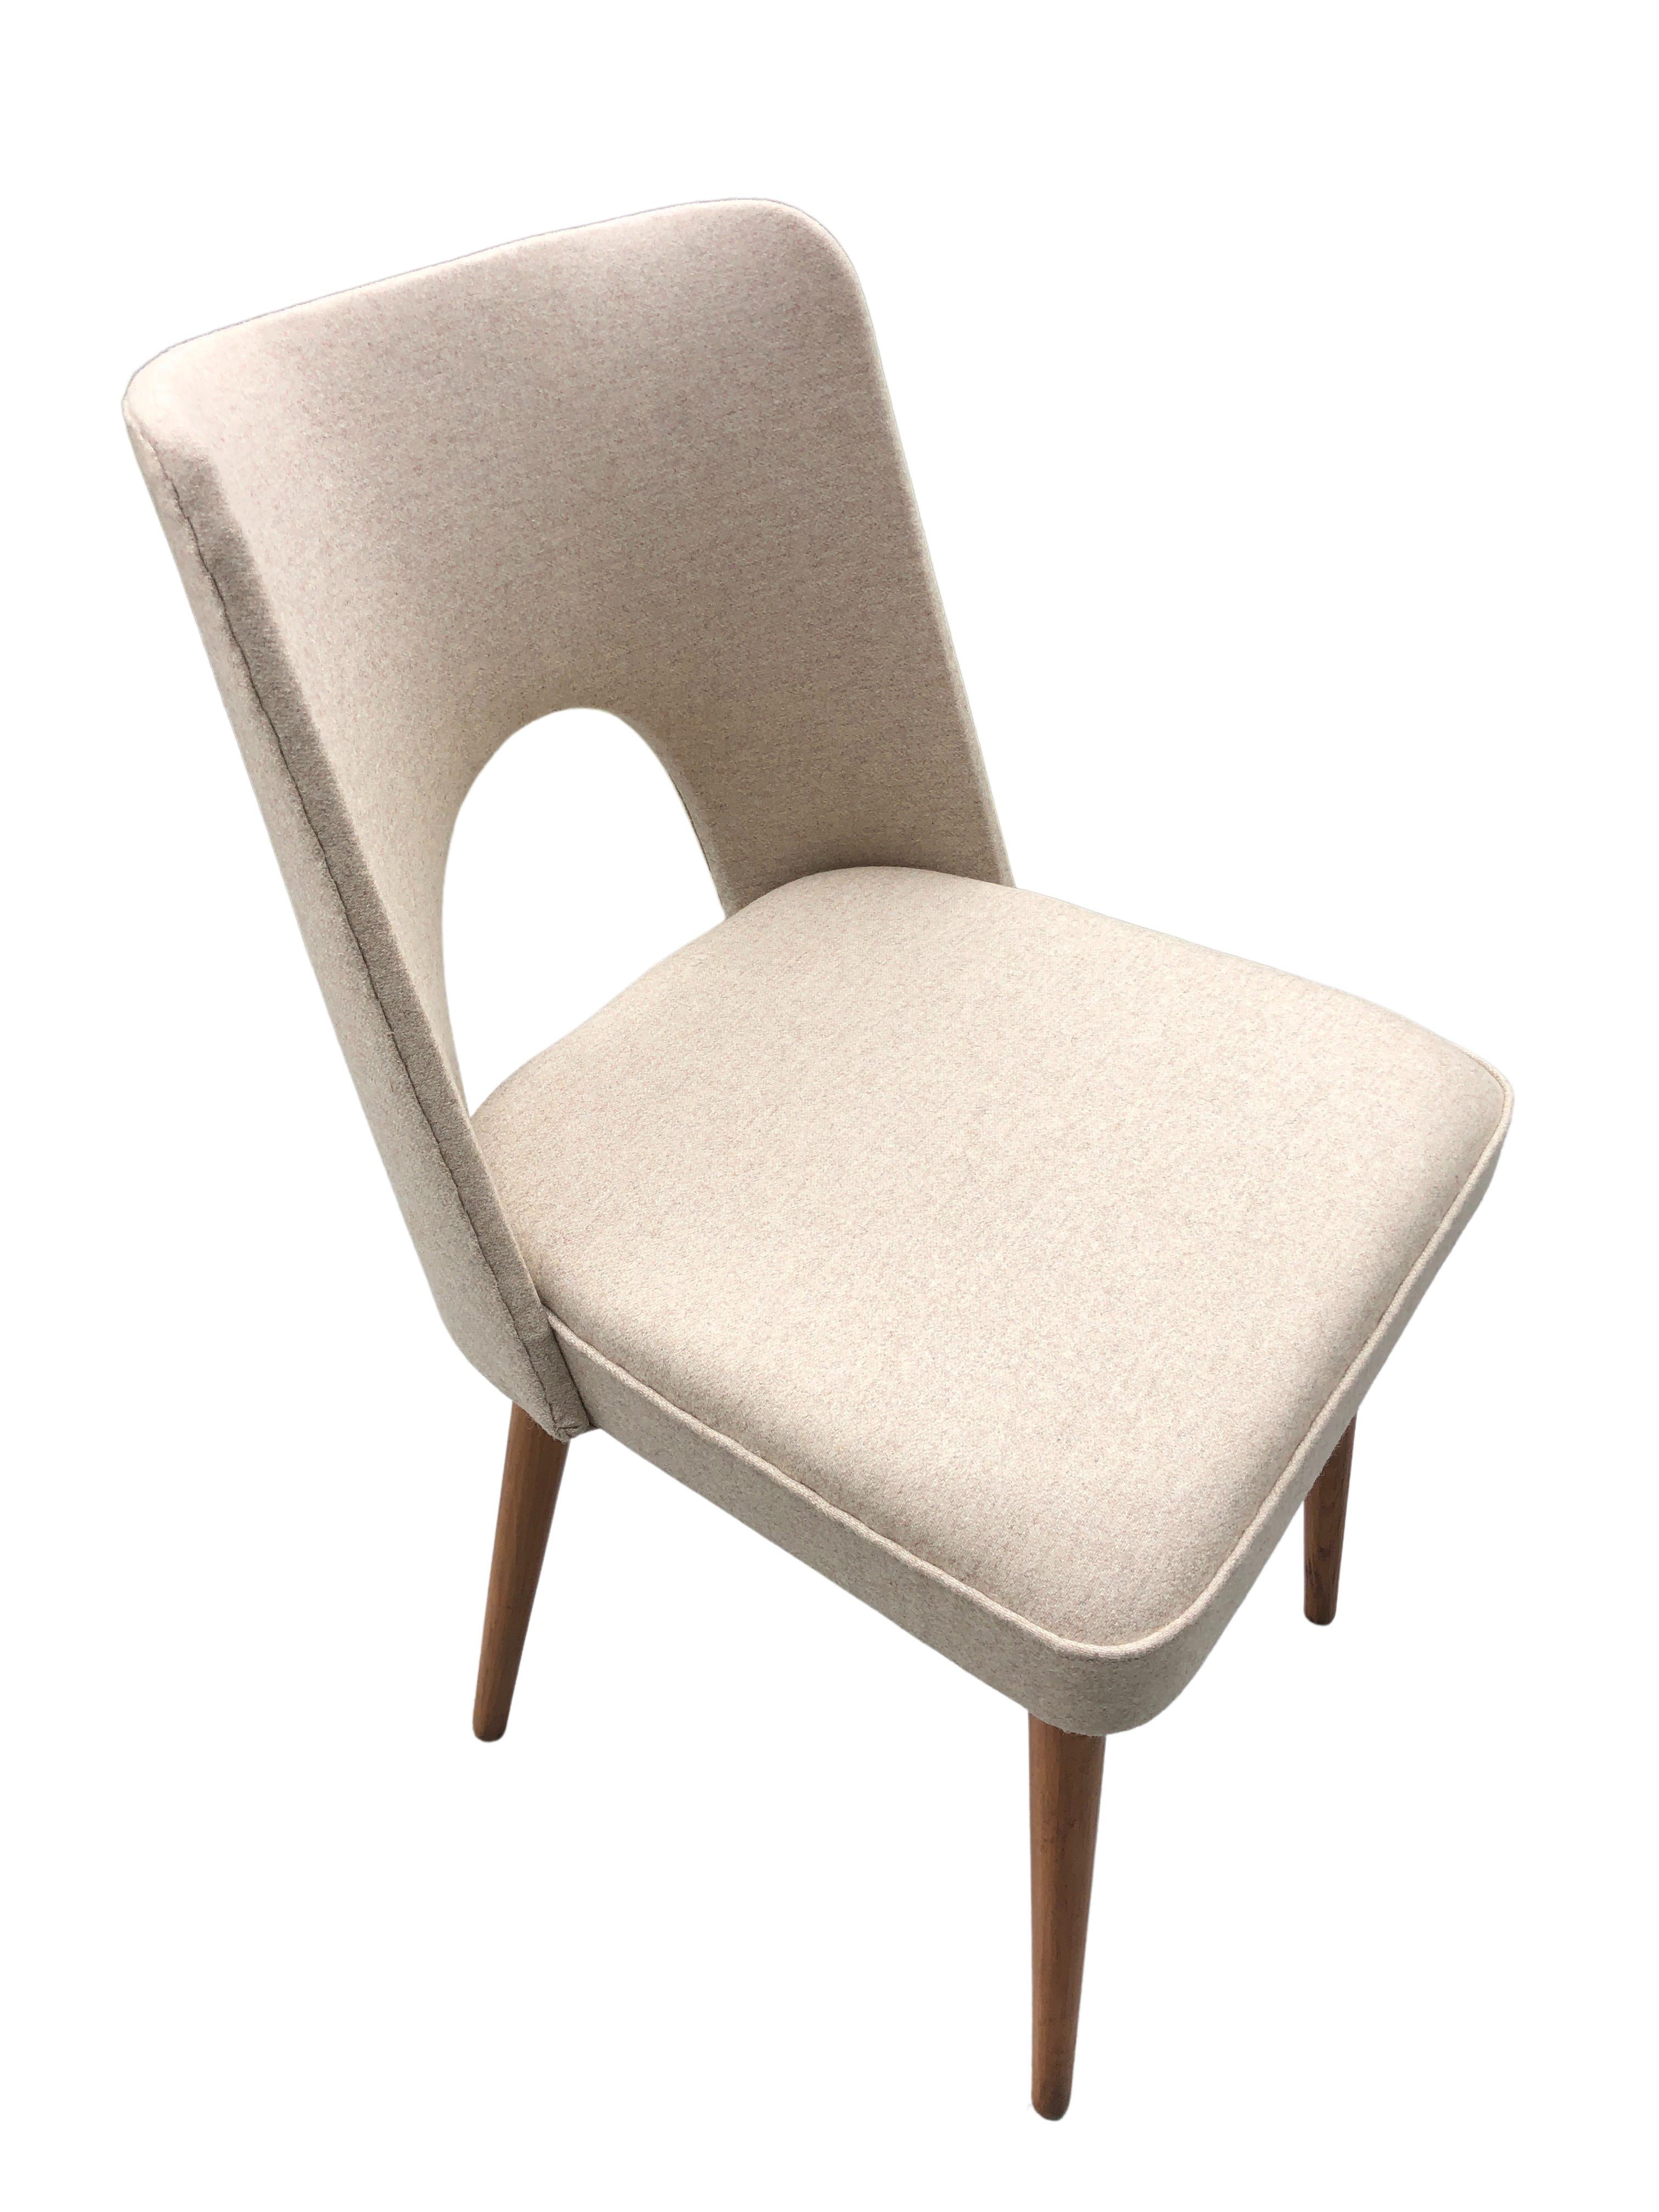 Beige Wool Shell Dining Chair by Lesniewski, 1960s For Sale 3